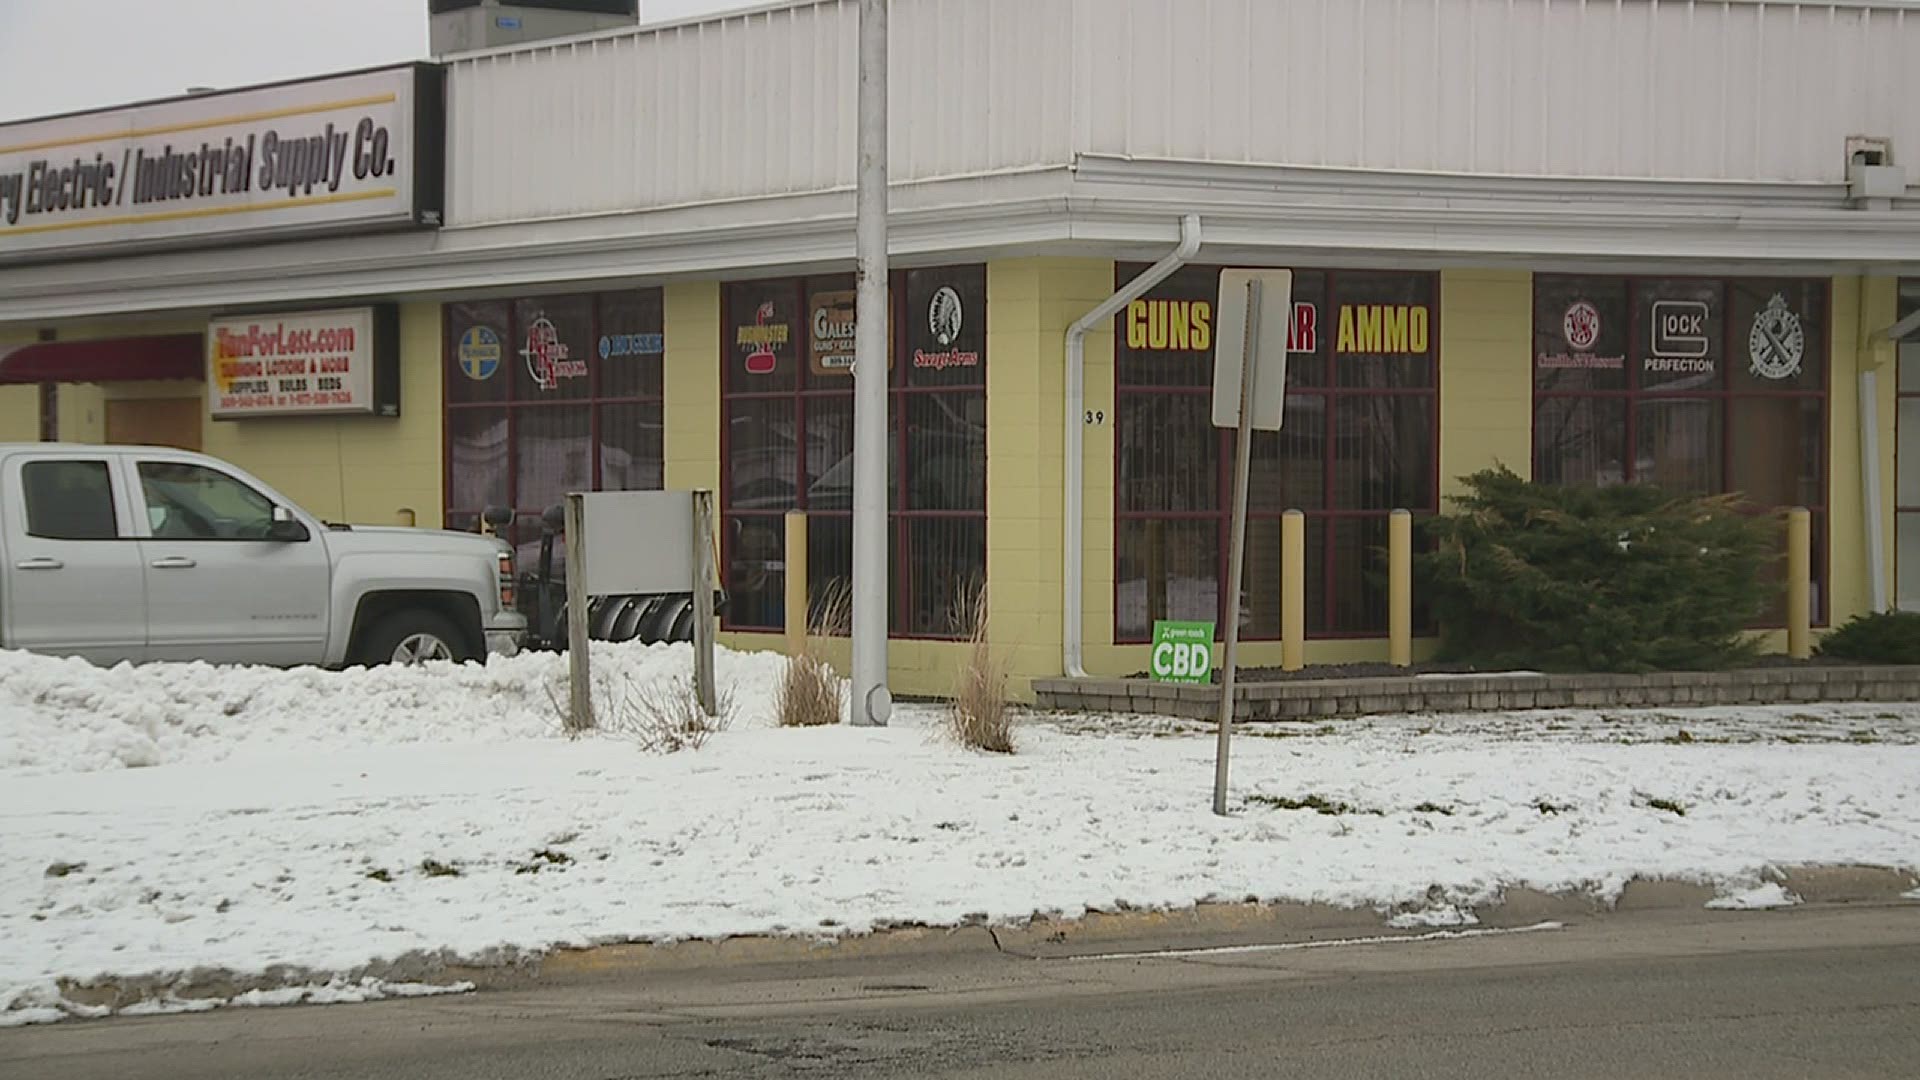 The incident happened Wednesday night, when police say the store was broken into and the owner fired at the intruders.